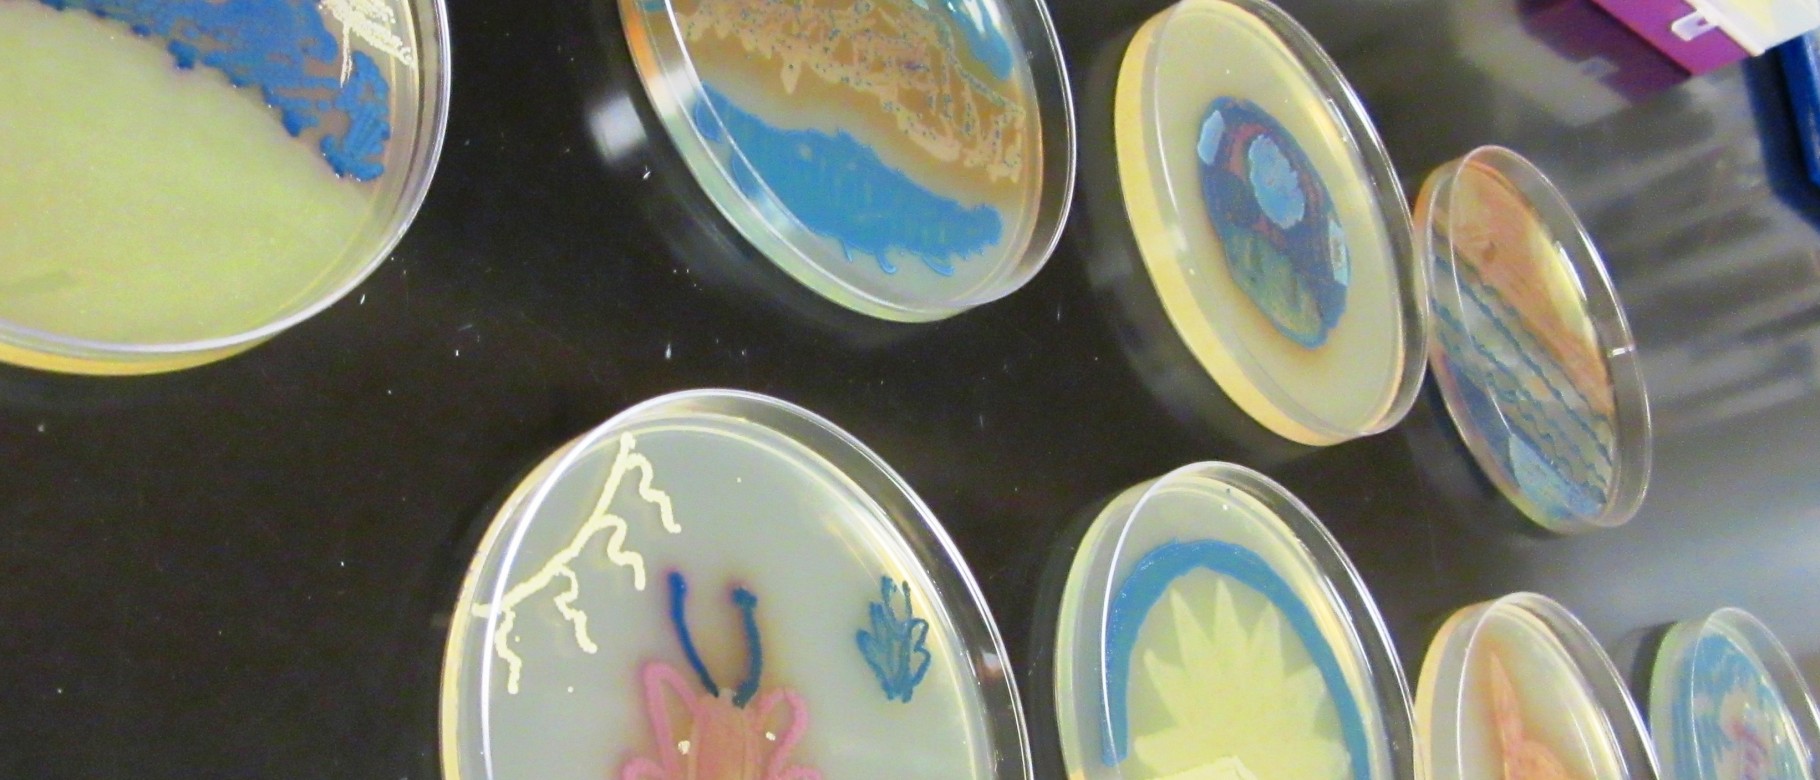 Agar art from the College of Pharmacy